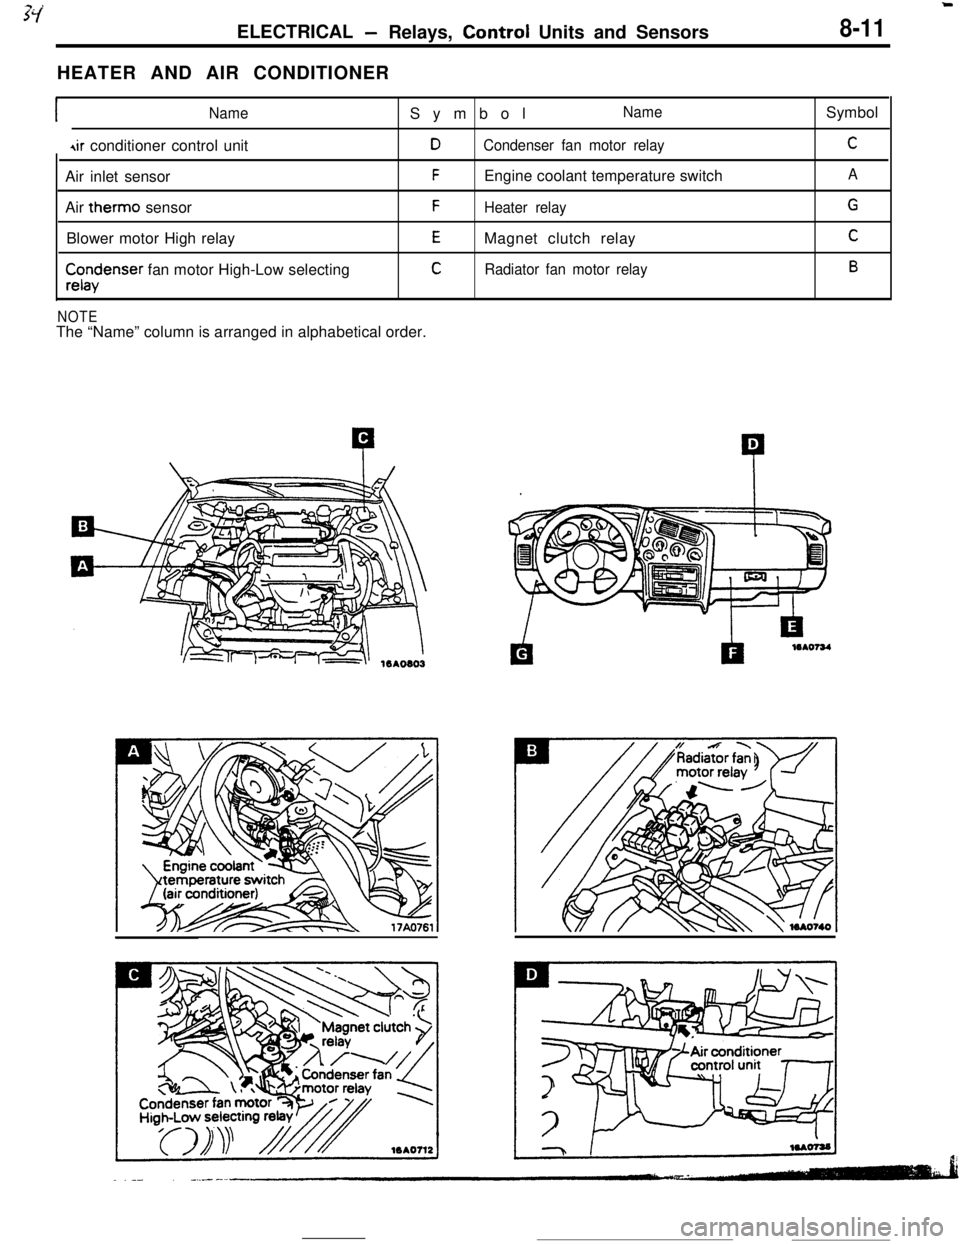 MITSUBISHI ECLIPSE 1990  Service Manual 1ELECTRICAL 
-Relays, Control Units and Sensors8-11HEATER AND AIR CONDITIONER
INameSymbolName
4ir conditioner control unitDCondenser fan motor relayAir inlet sensor
FEngine coolant temperature switch
